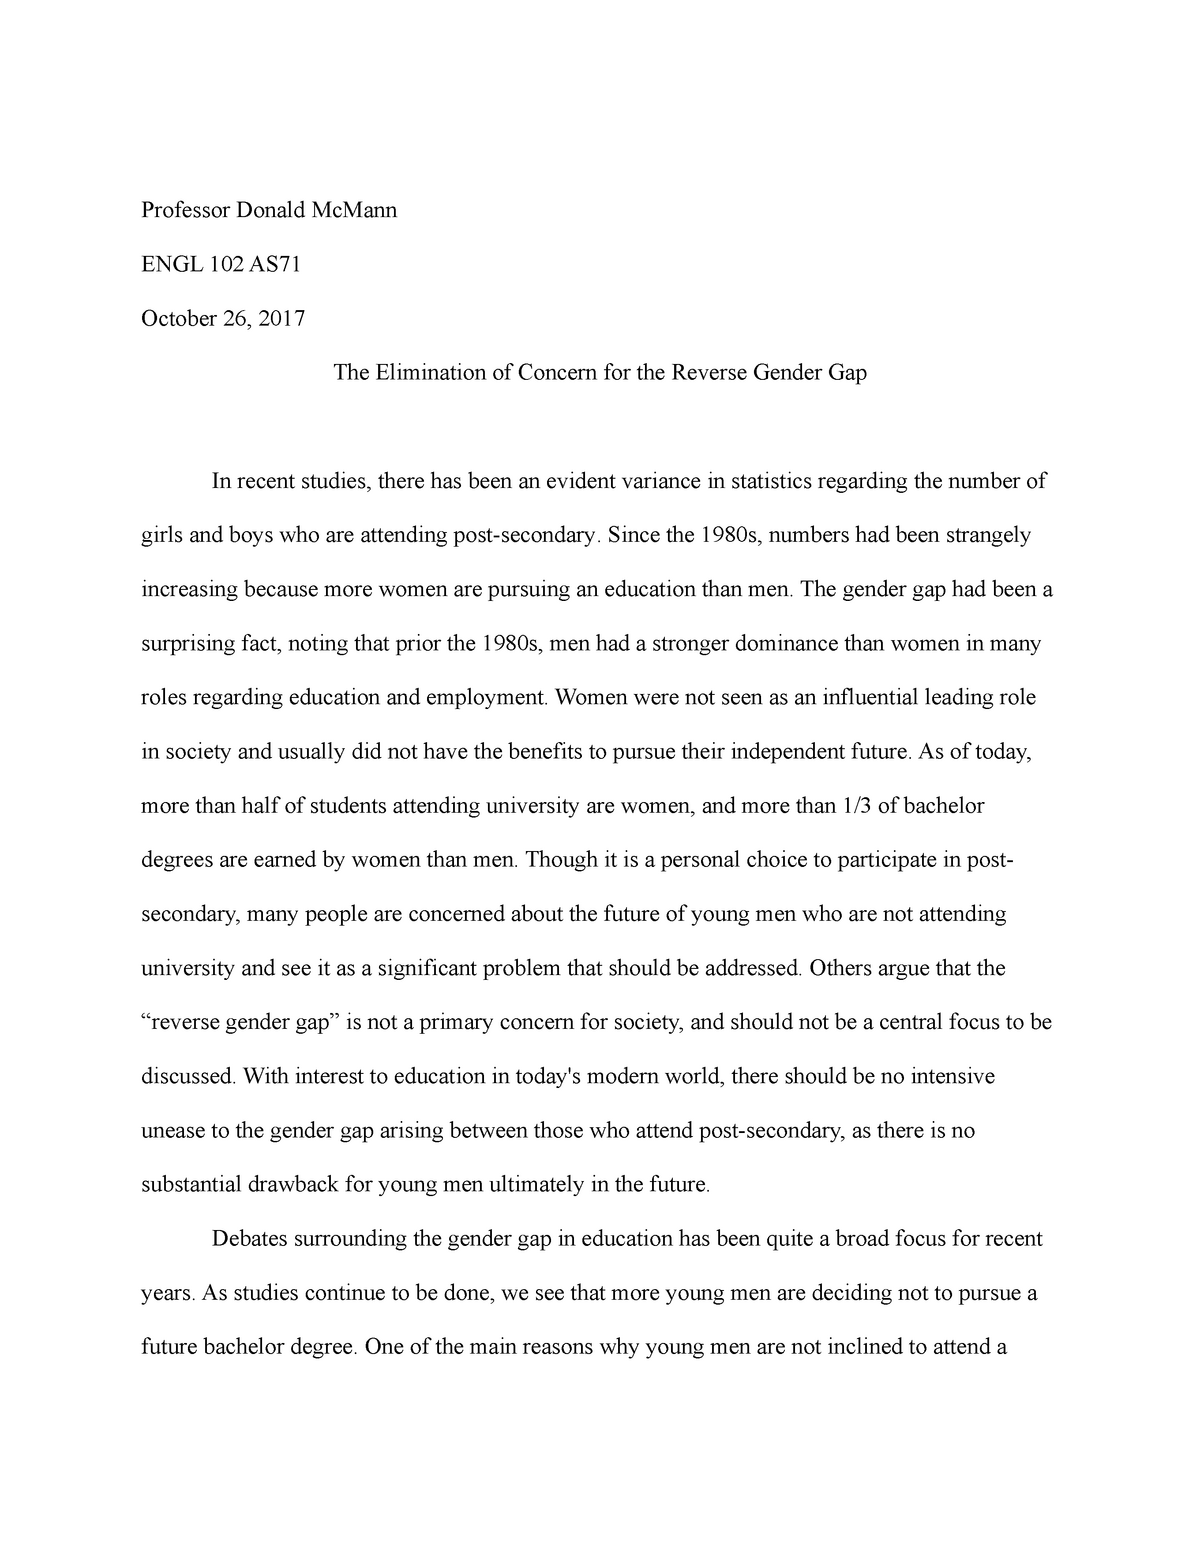 english 102 research paper